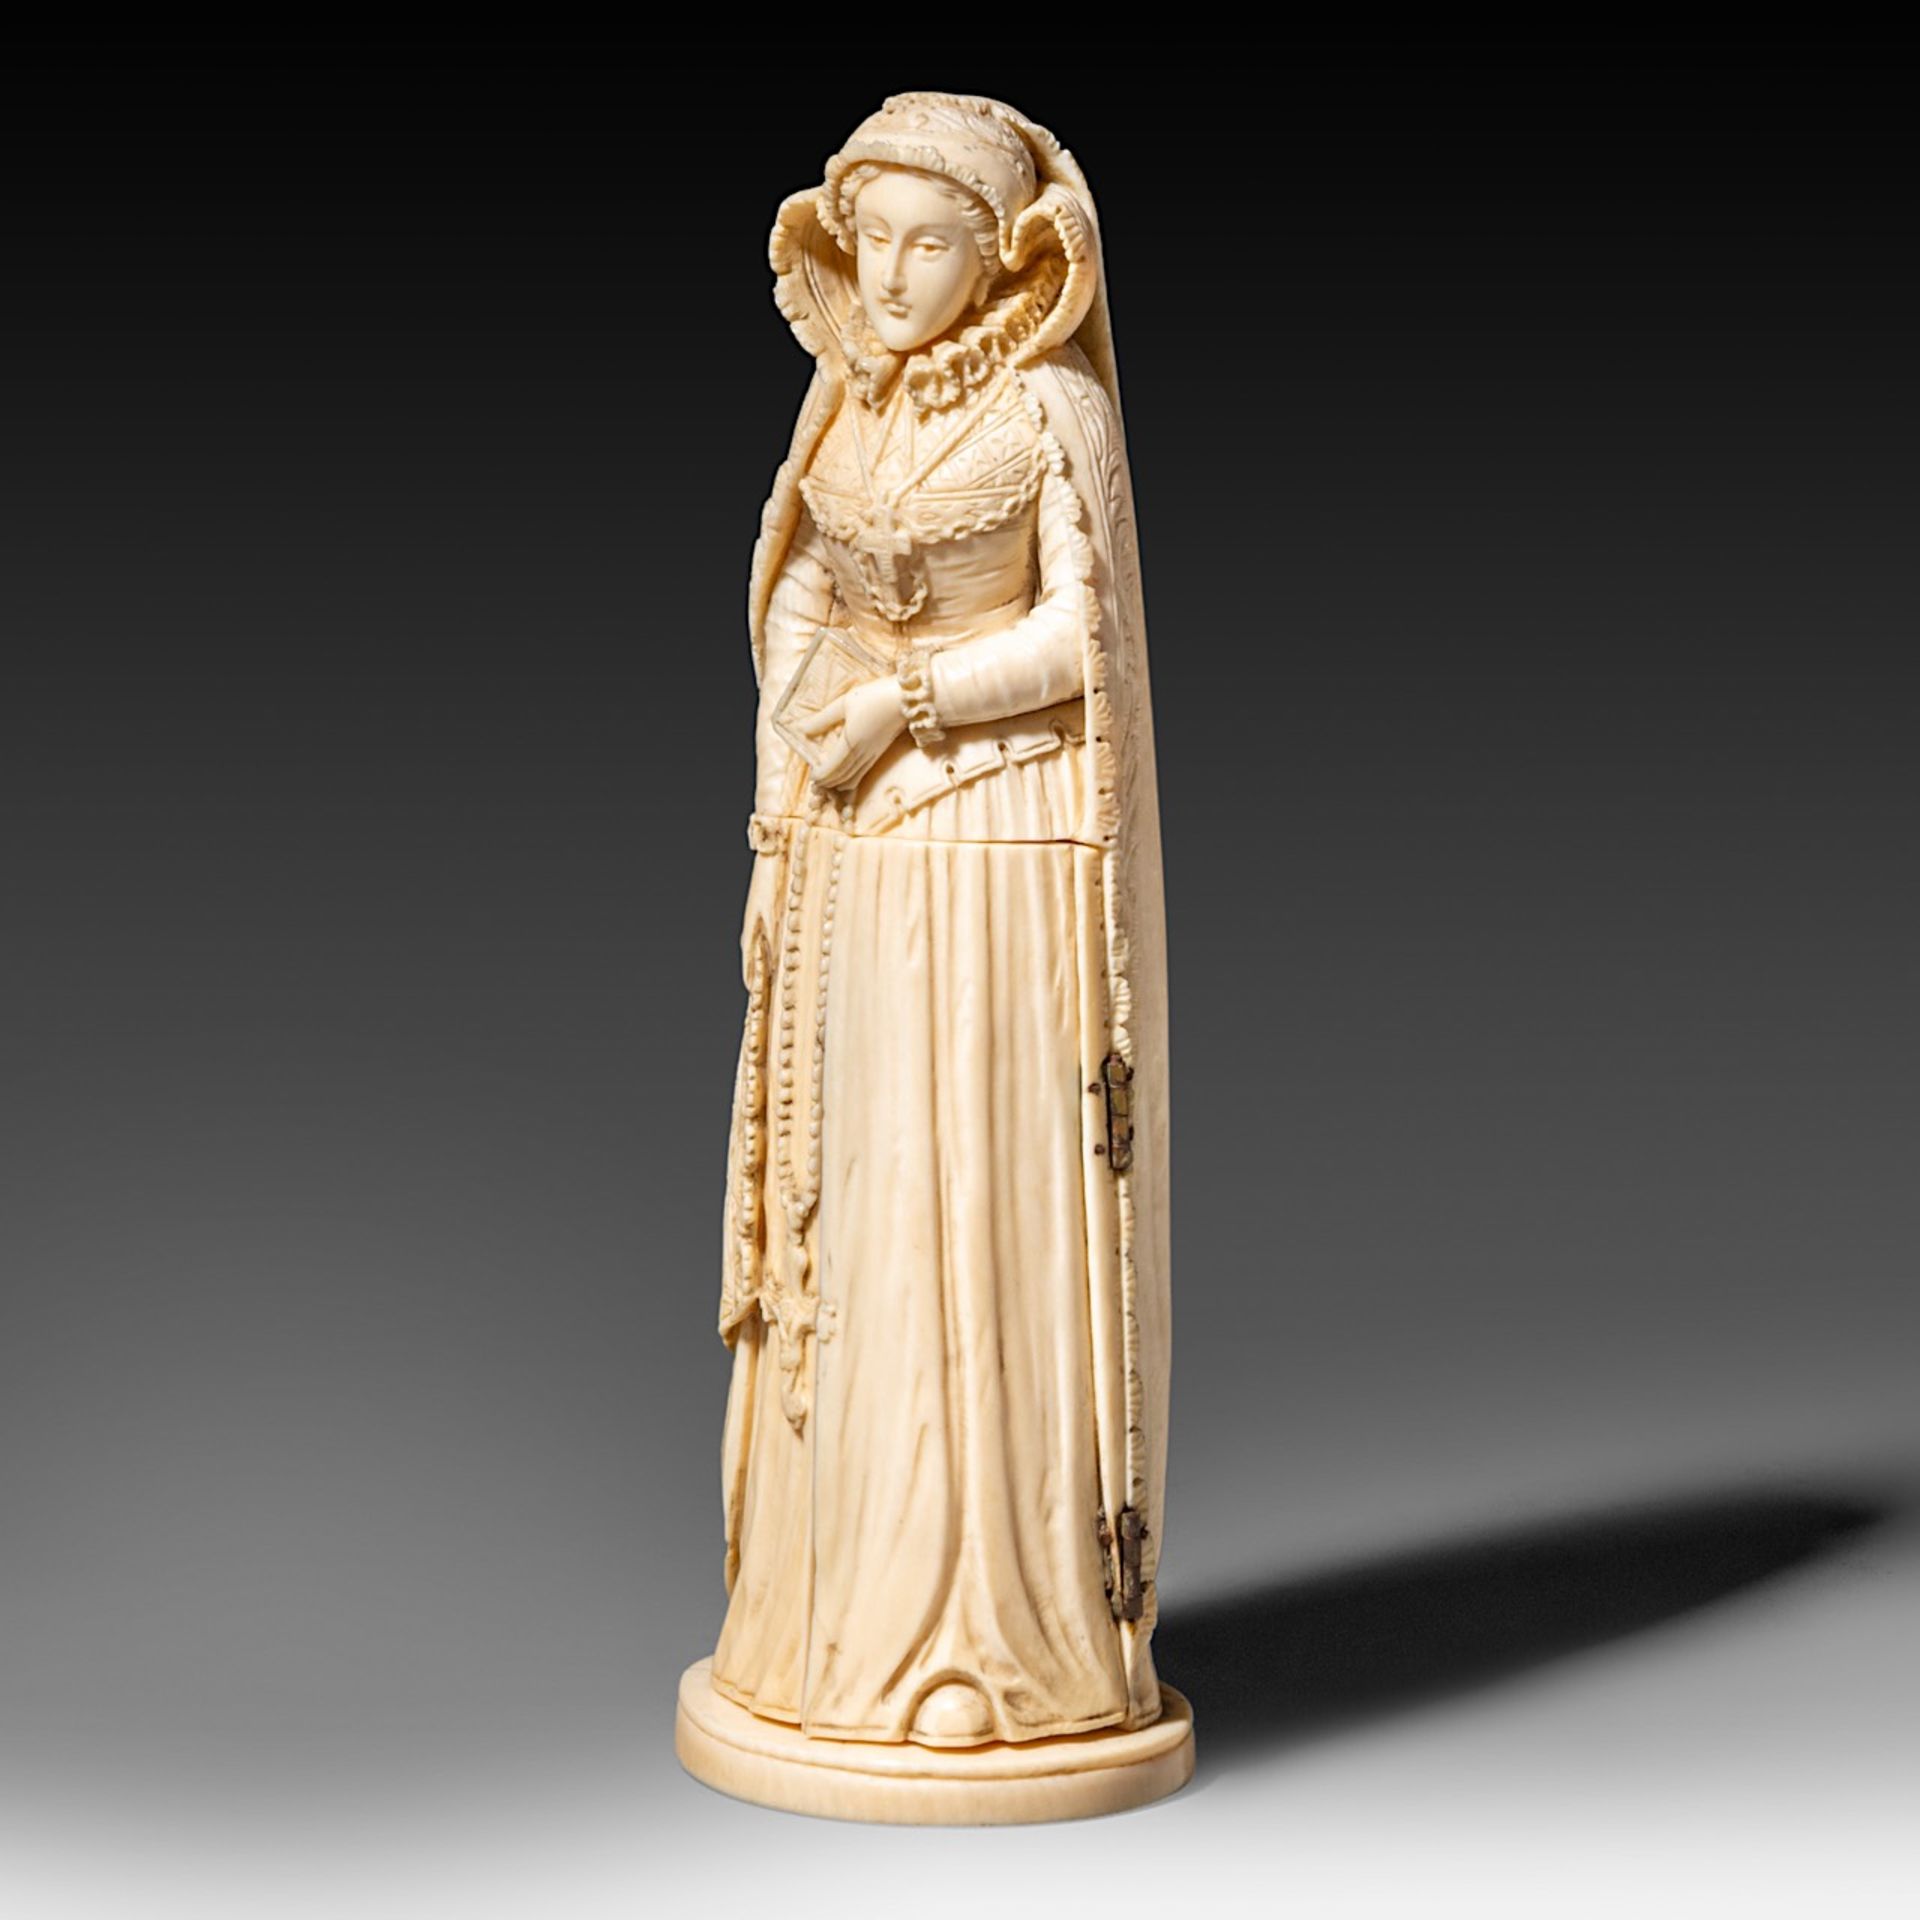 An ivory triptych sculpture of probably Mary Queen of Scots, French, 19thC, H 20 cm - 447 g (+) - Image 3 of 12